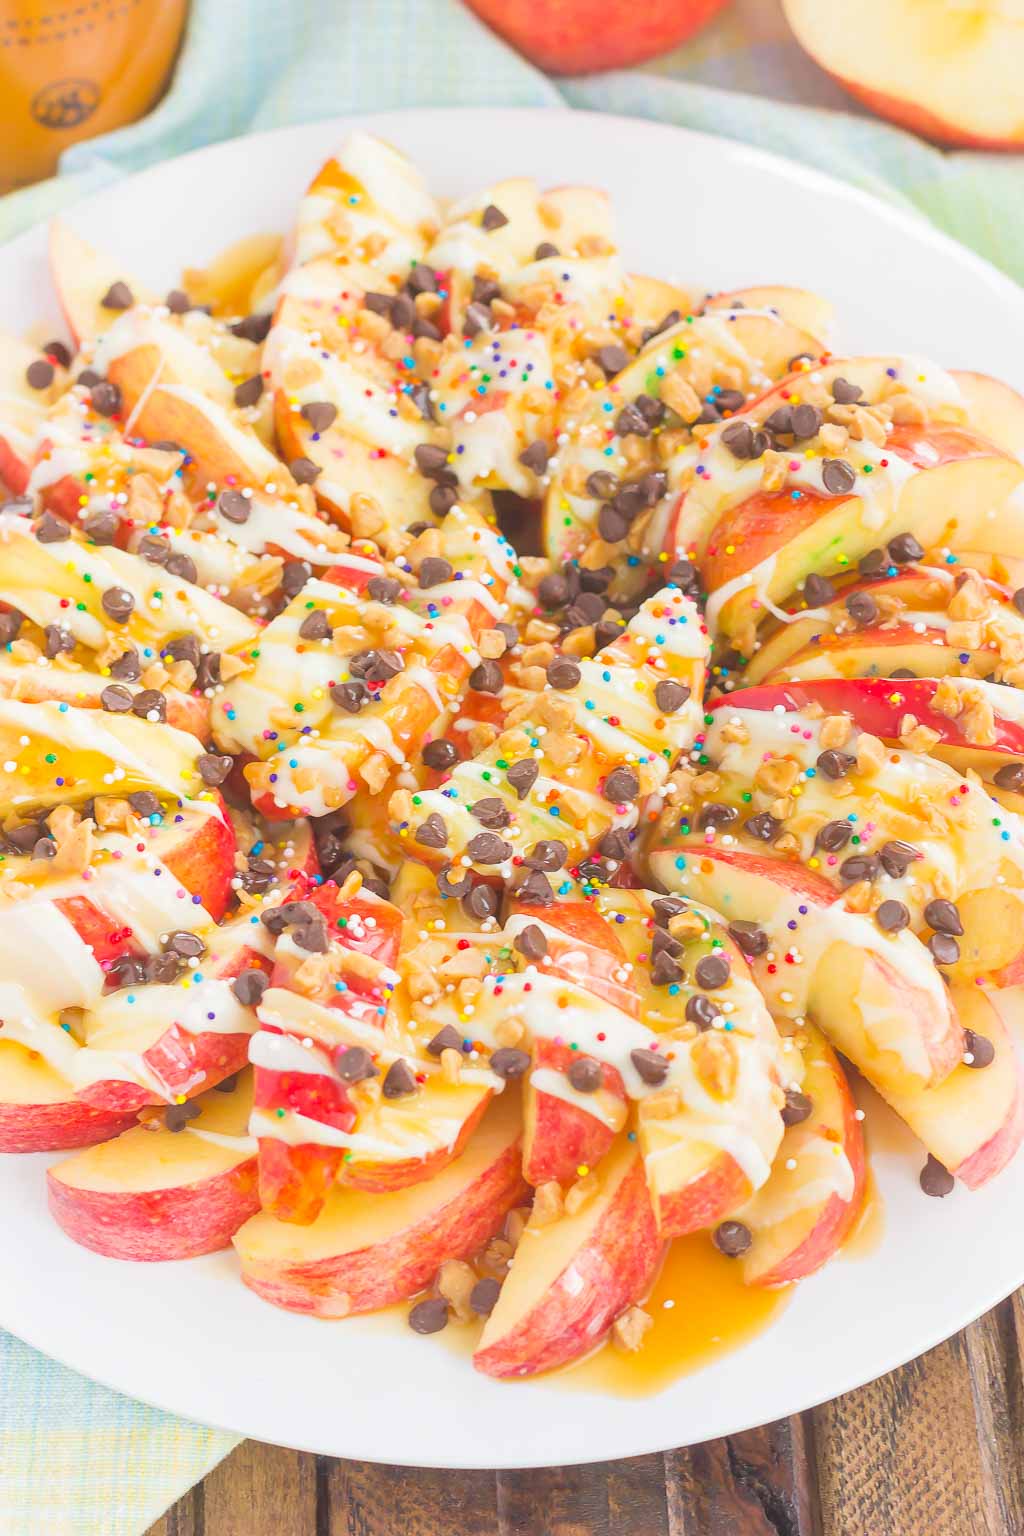 These Caramel Apple Nachos make a deliciously easy snack that's perfect for just about any time. Apple slices are drizzled with a rich caramel sauce and white chocolate, and then topped with toffee bits, chocolate chips, and sprinkles. This simple treat is ready in less than 10 minutes and is sure to be a crowd-pleaser! #apples #applerecipe #caramelapple #nachos #applenachos #caramelapplenachos #appledessert #applesnack #falldessert #fallsnack